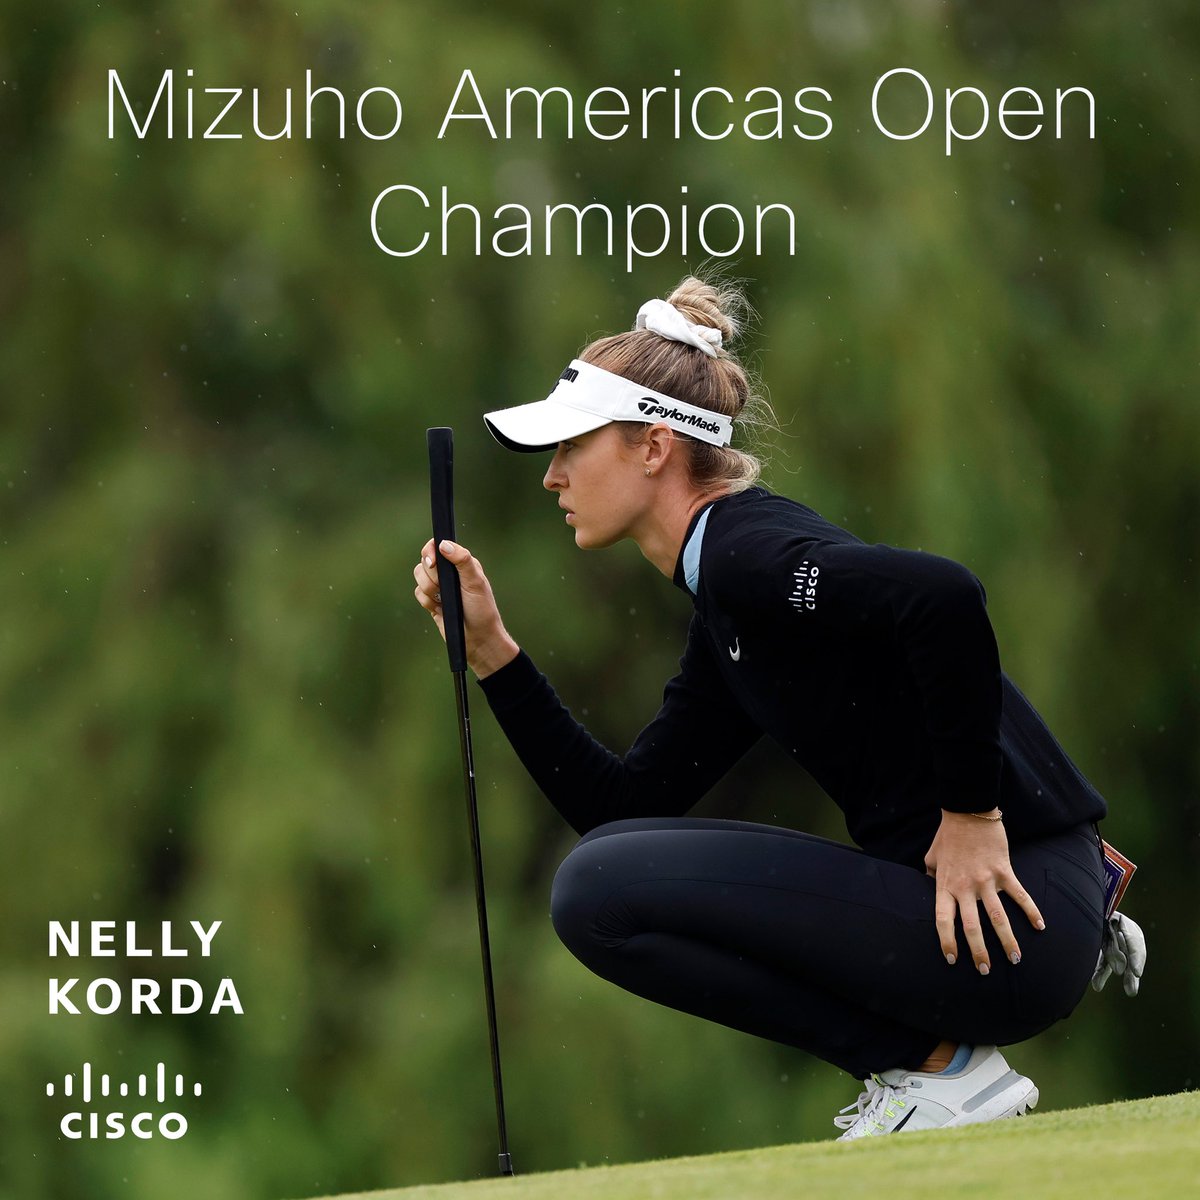 No stopping Nelly 🏆 Congrats @NellyKorda on capturing SIX titles in your last seven events 👏#TeamCisco